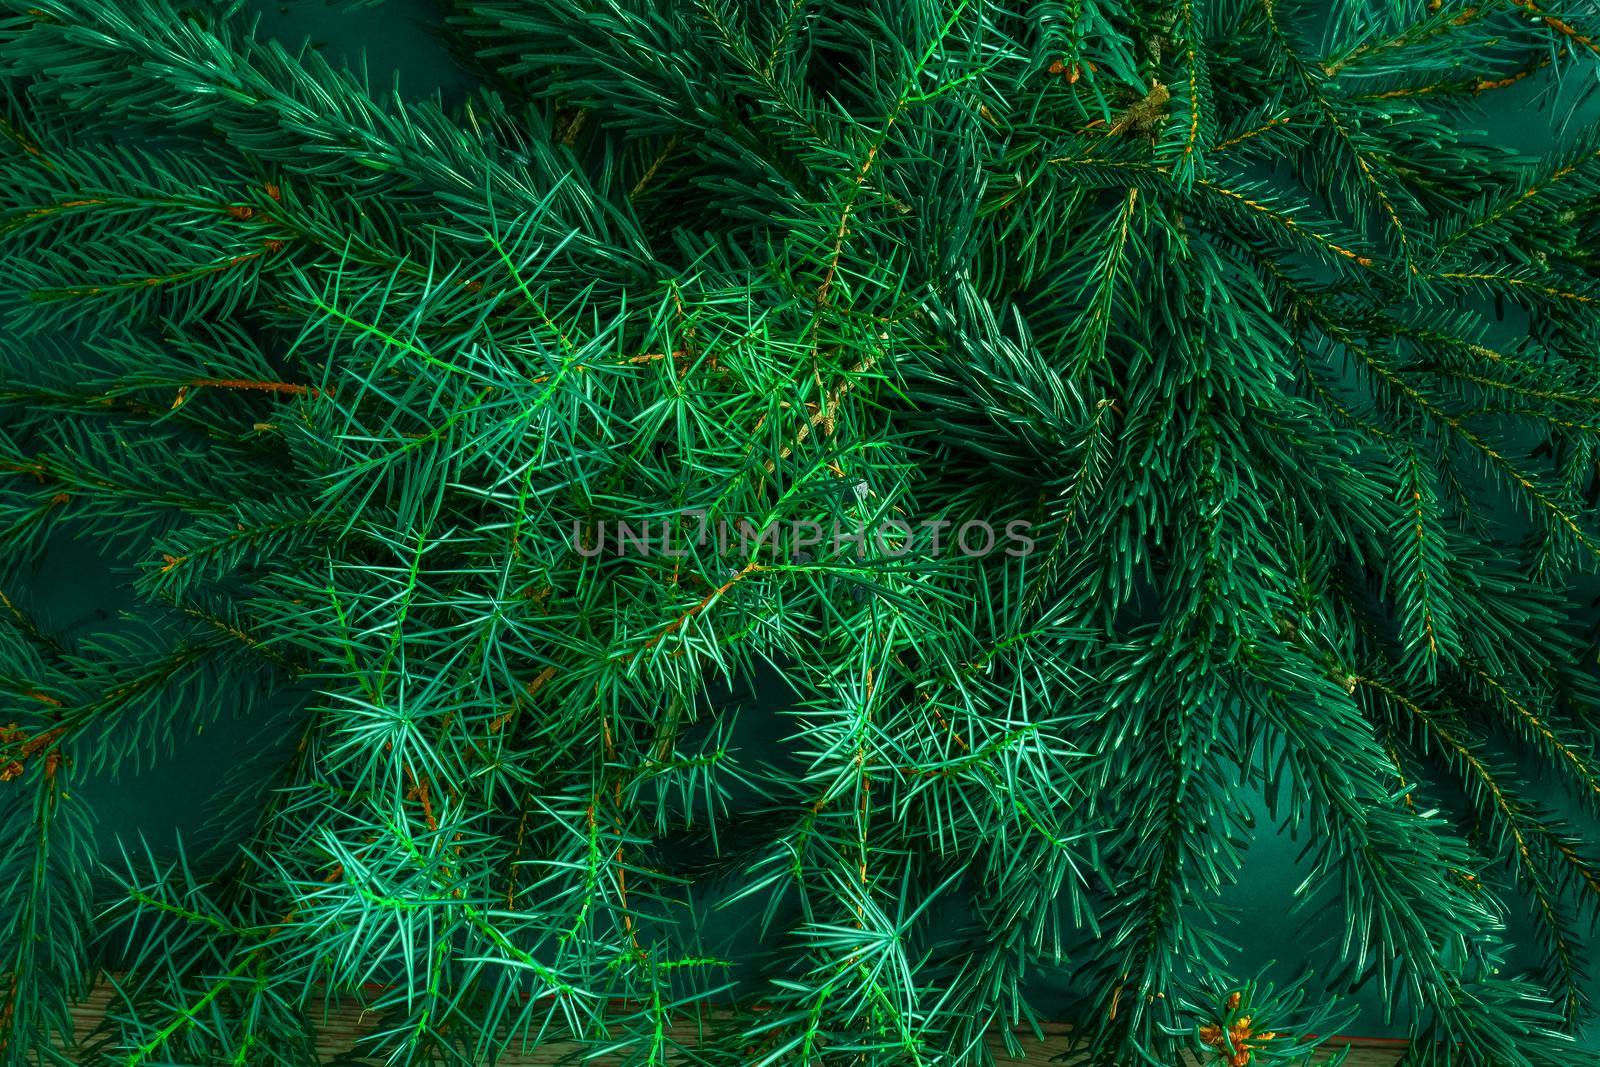 Christmas green background. Pine branches, needles and Christmas trees. View from above. Christmas nature background. December mood concept. Copy space.